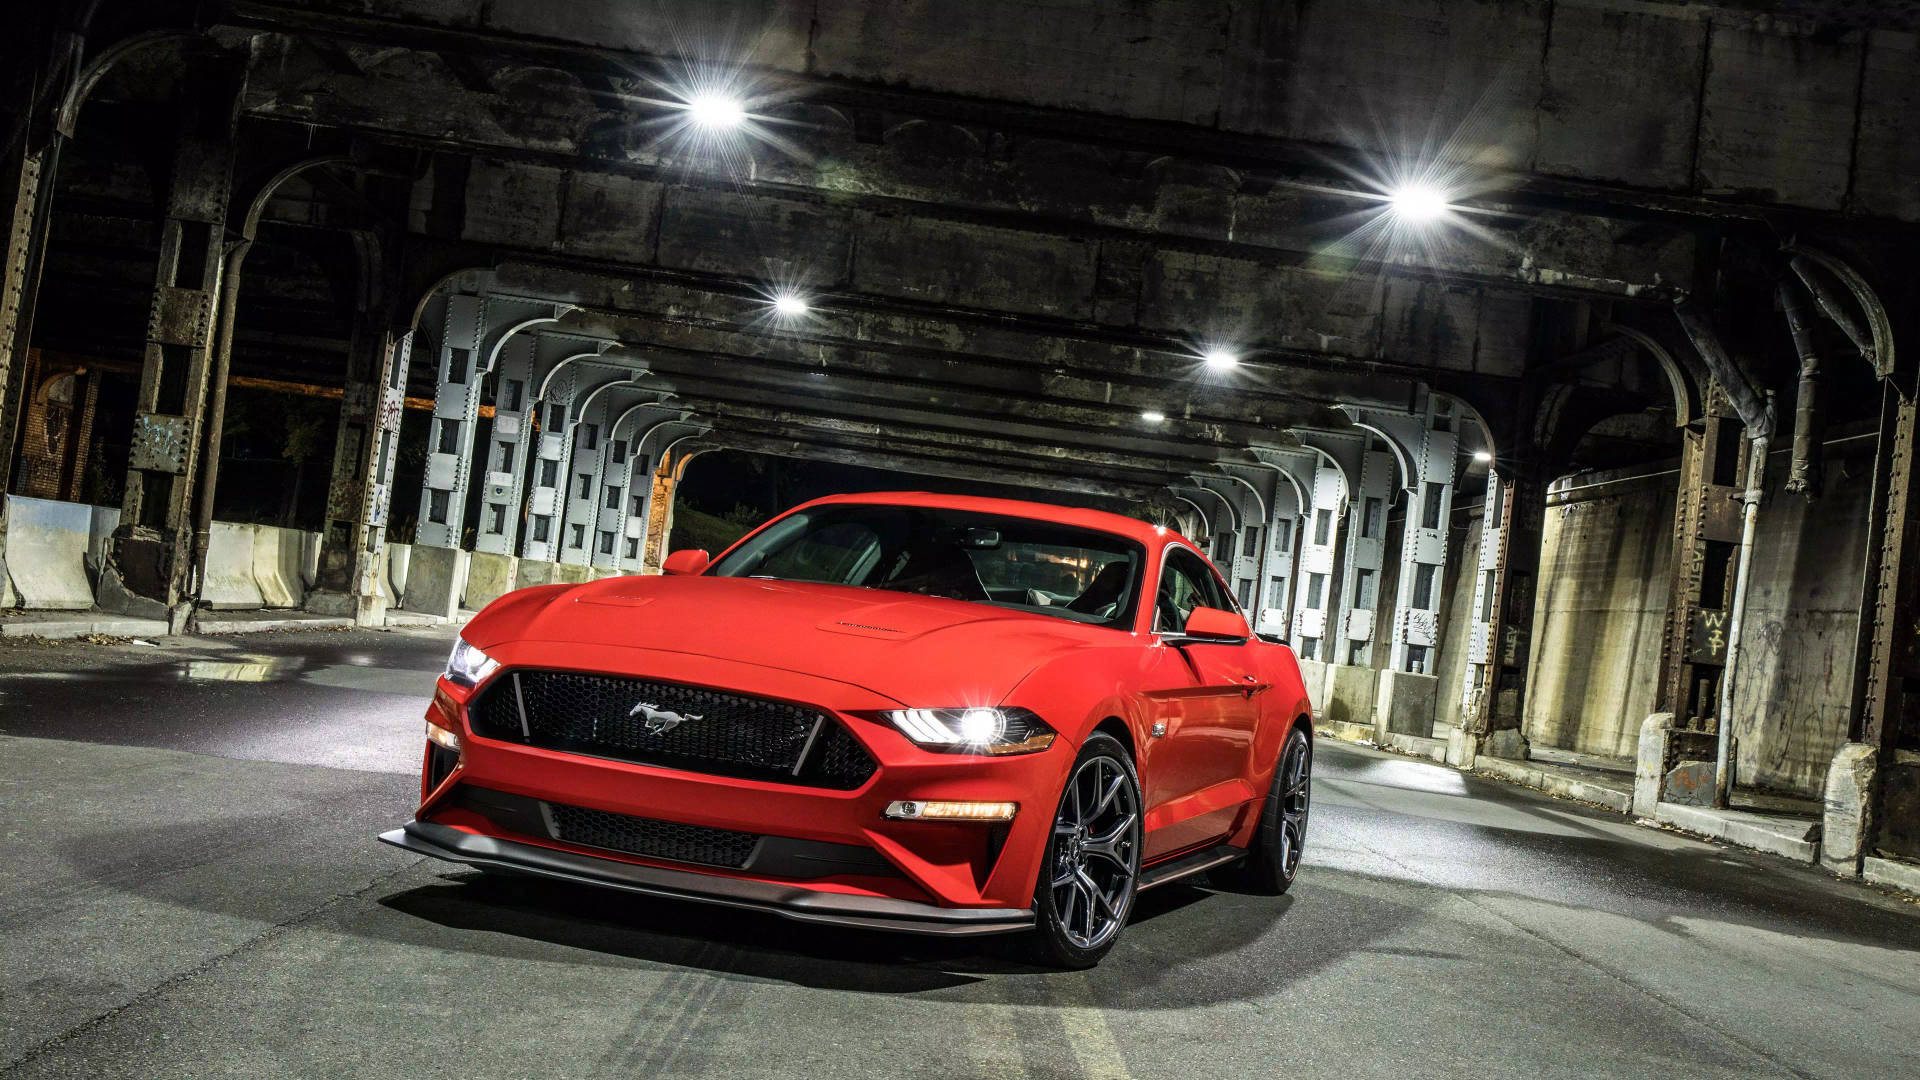 Cruise in Style in a Cool Mustang Wallpaper